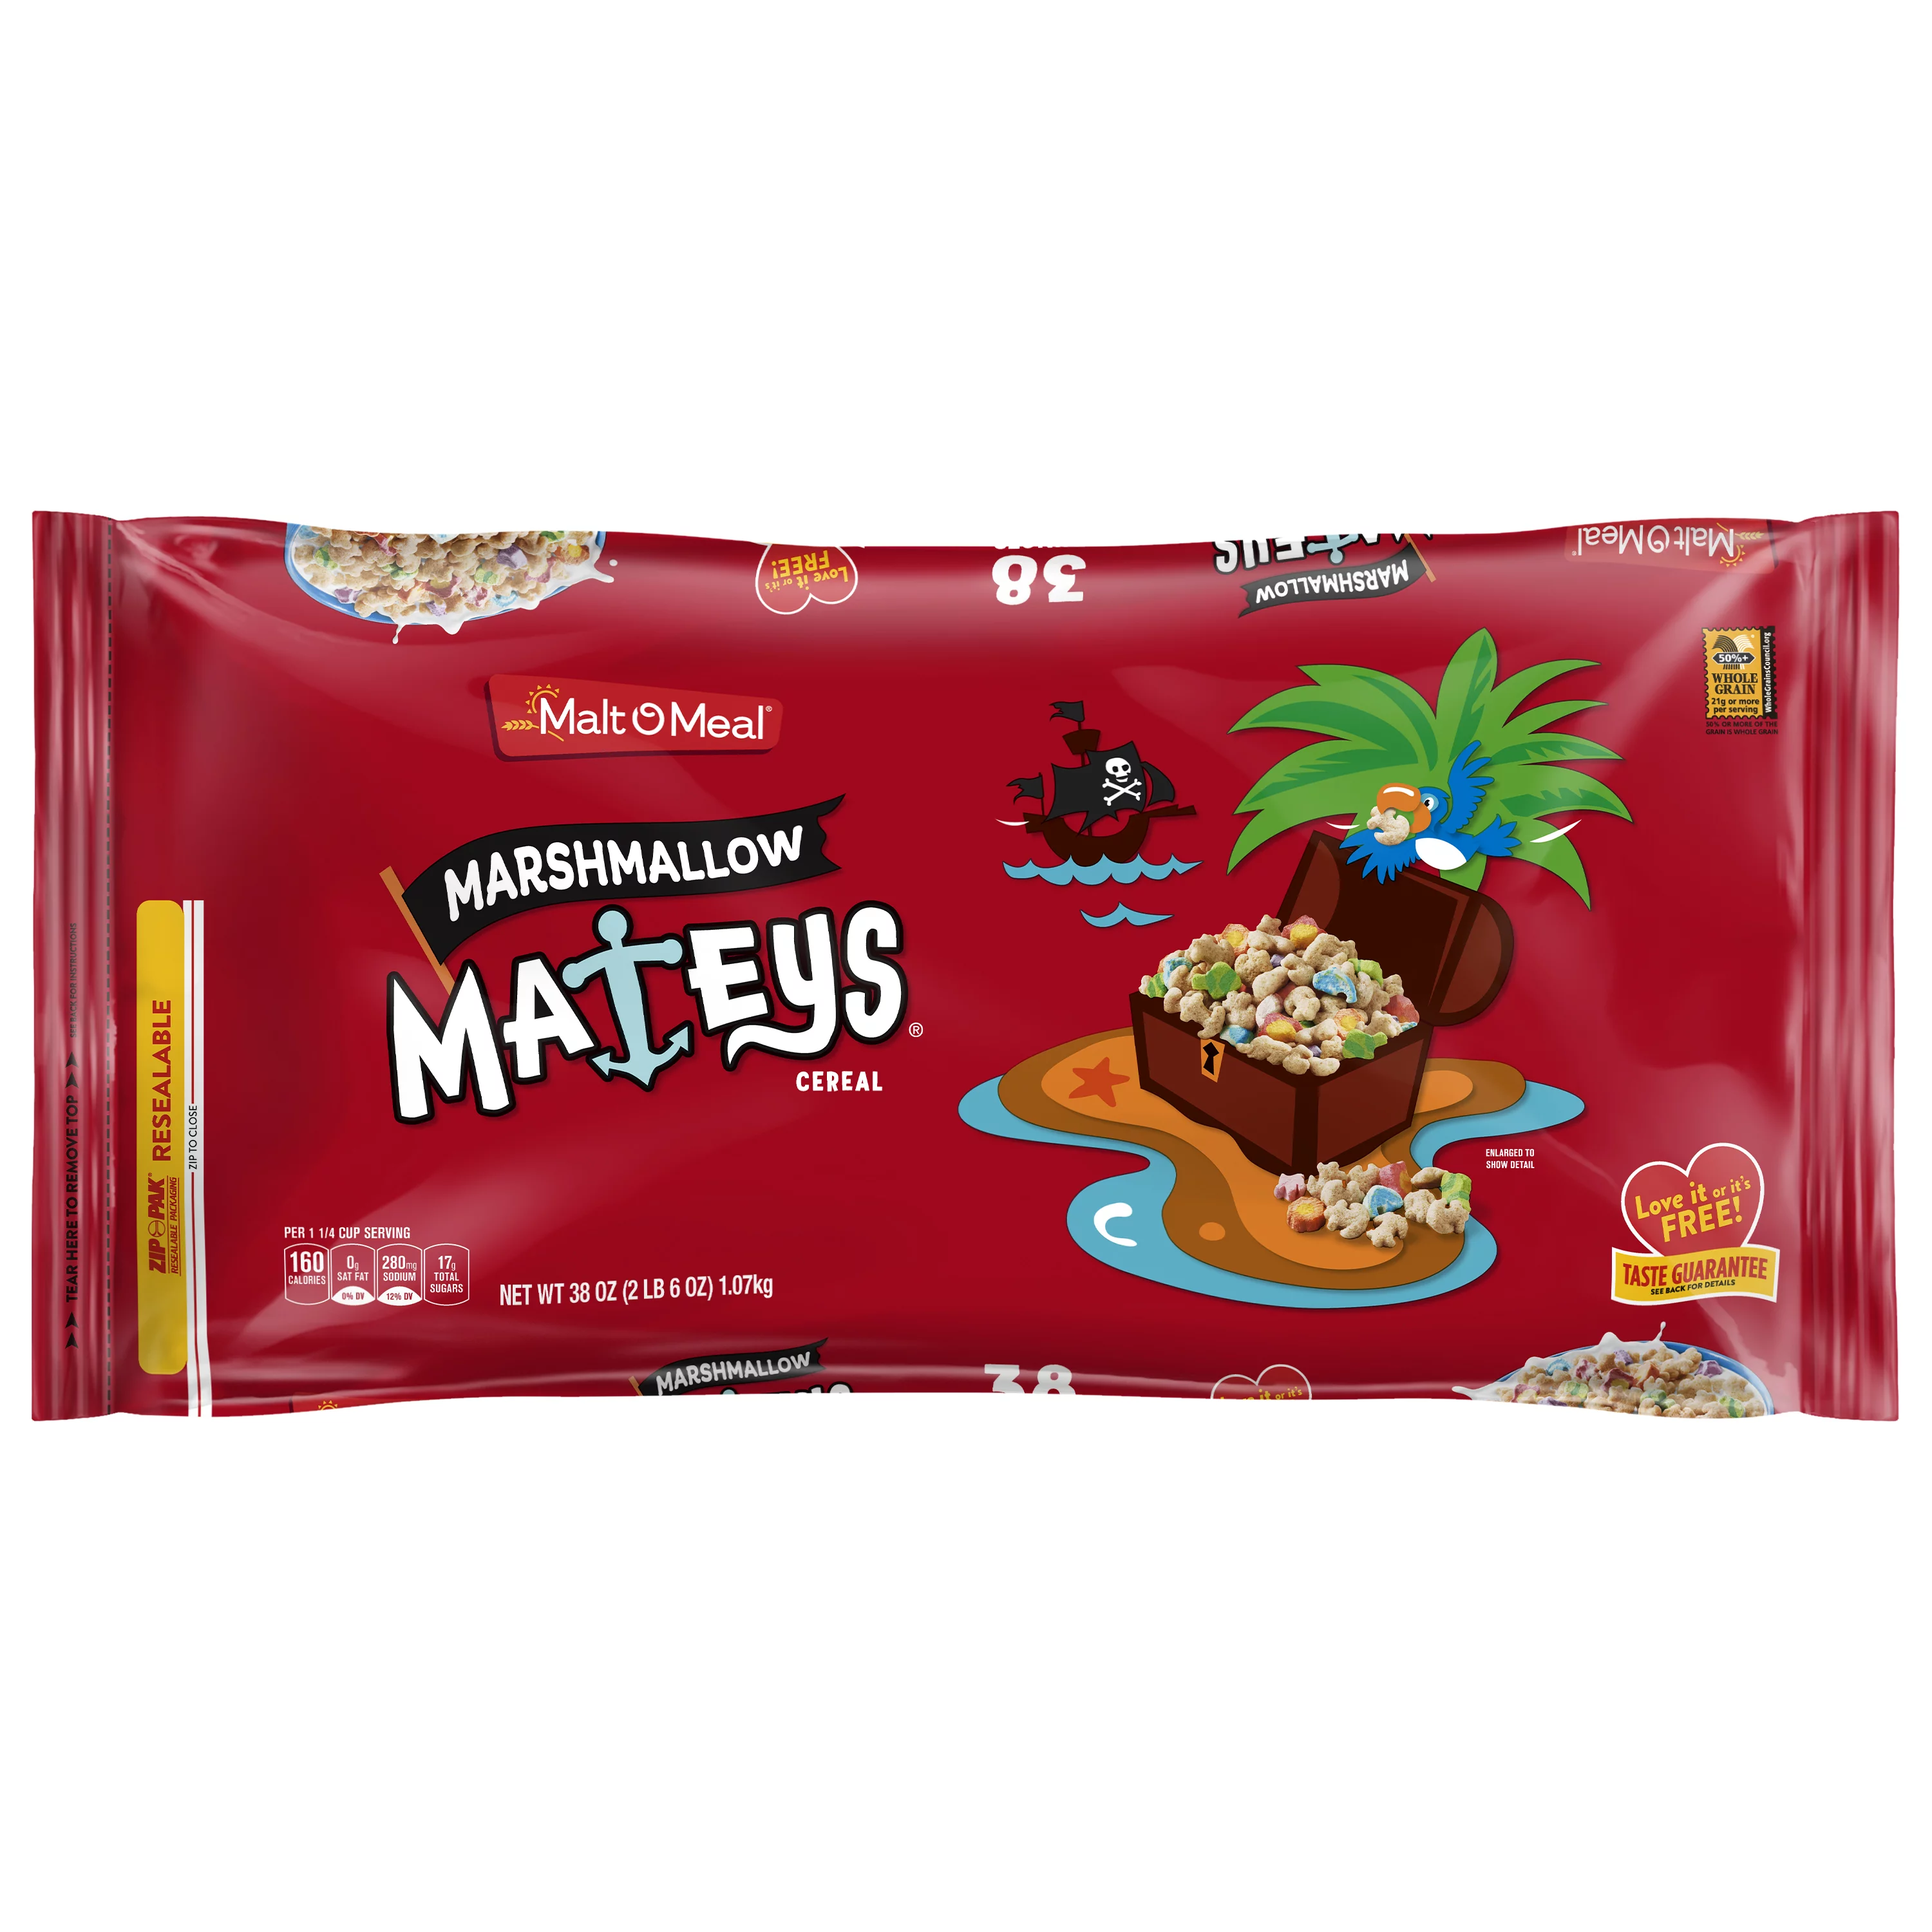 Malt-O-Meal Marshmallow Mateys Breakfast Cereal with Marshmallow Bits, 38 OZ Bag